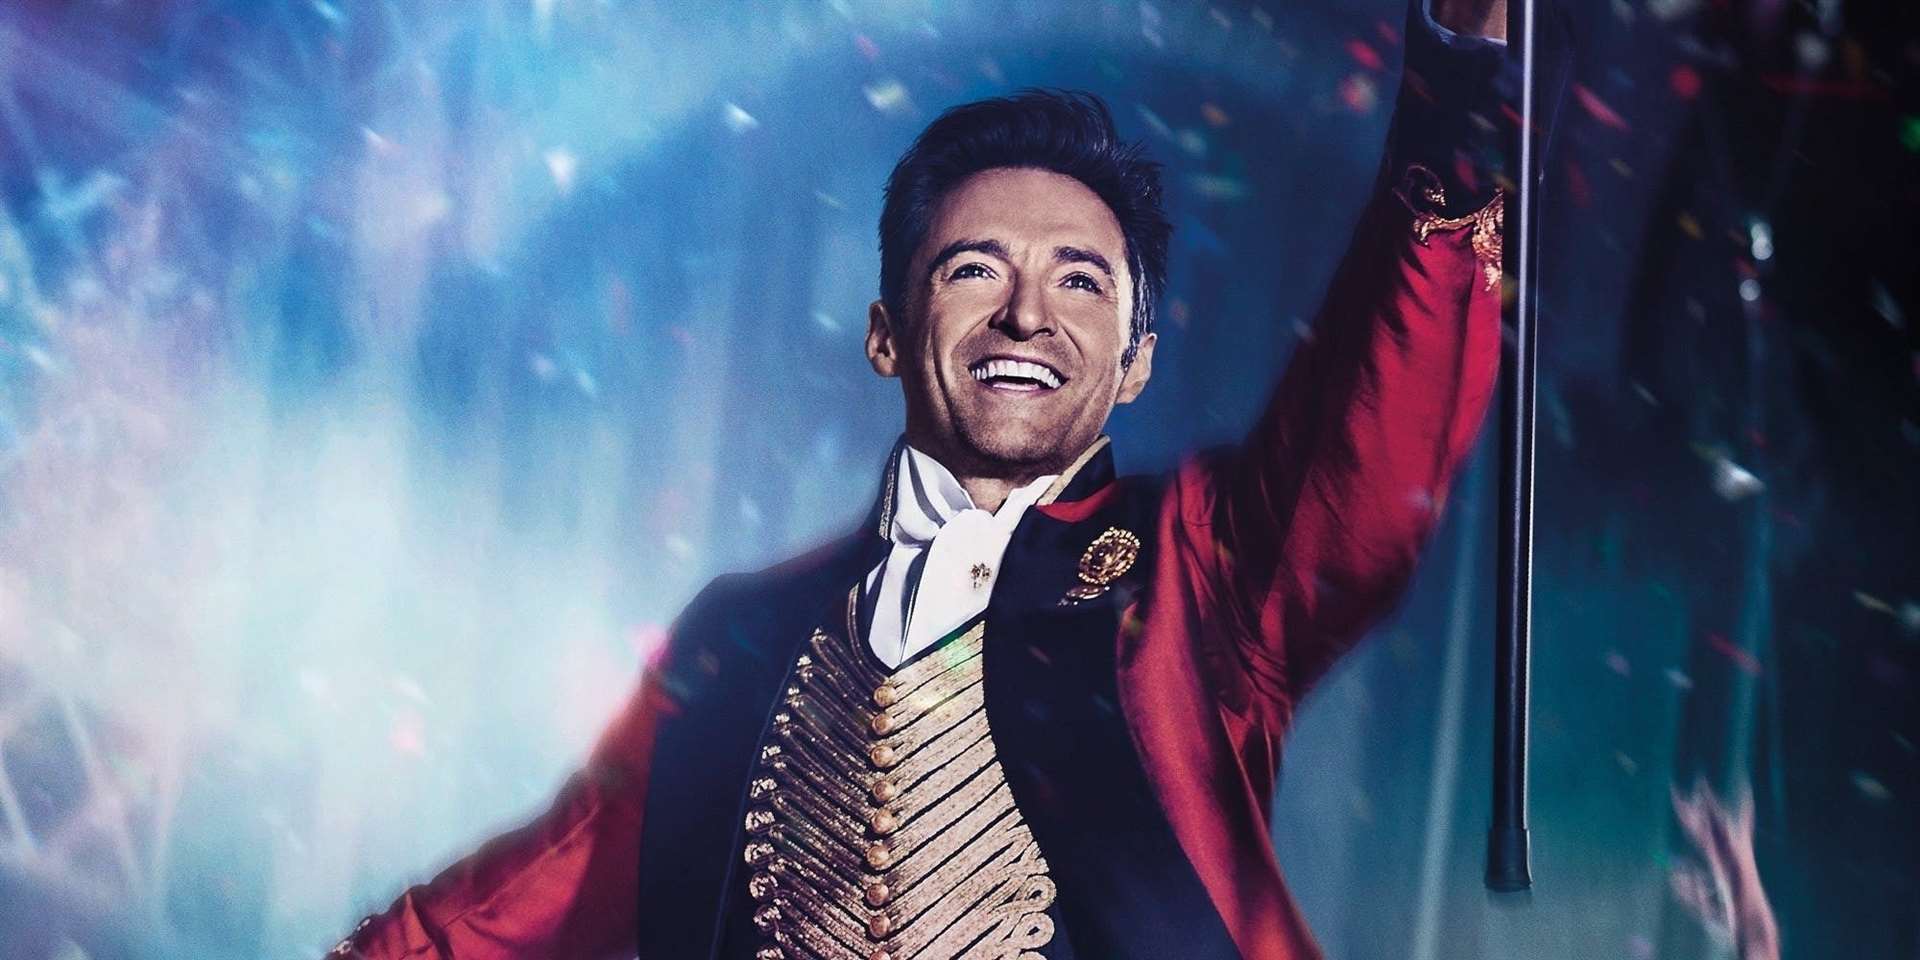 Sing along to The Greatest Showman